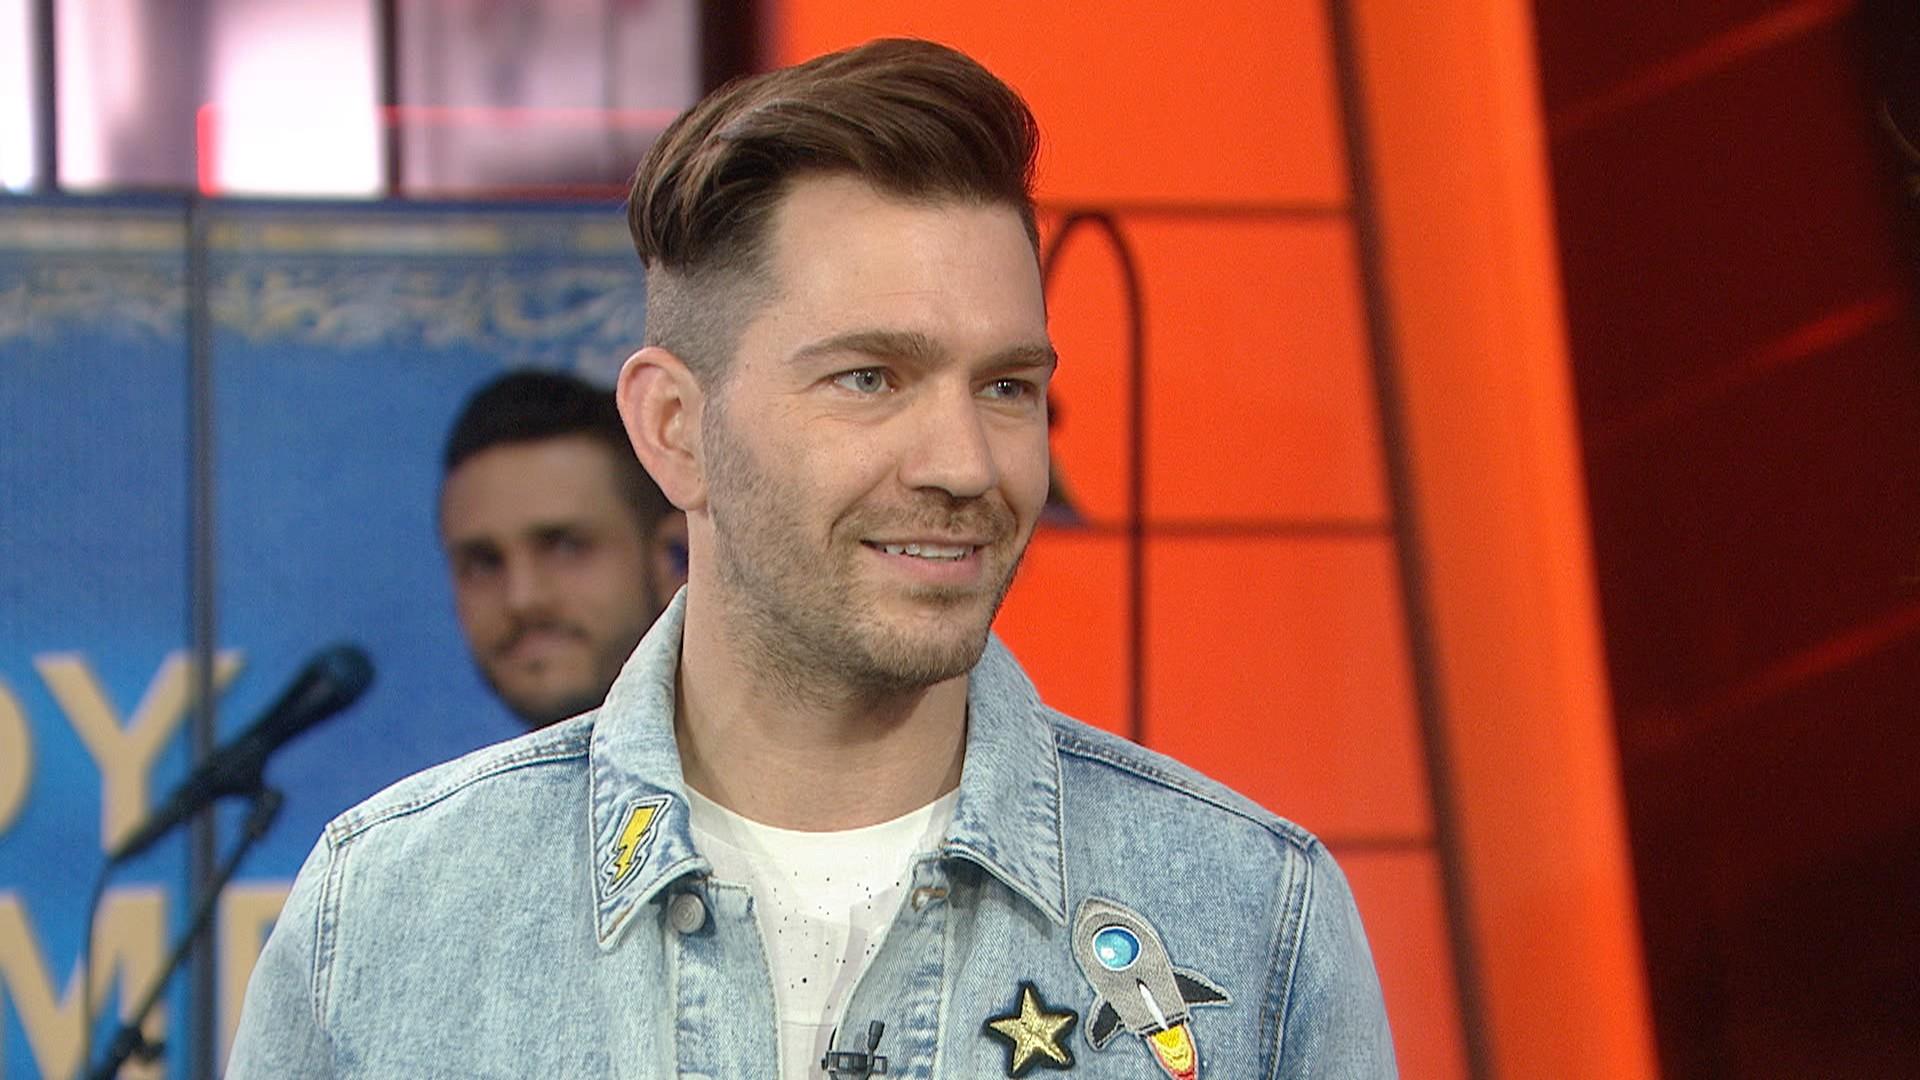 Andy Grammer on his new baby daughter Louisiana: 'She's the best